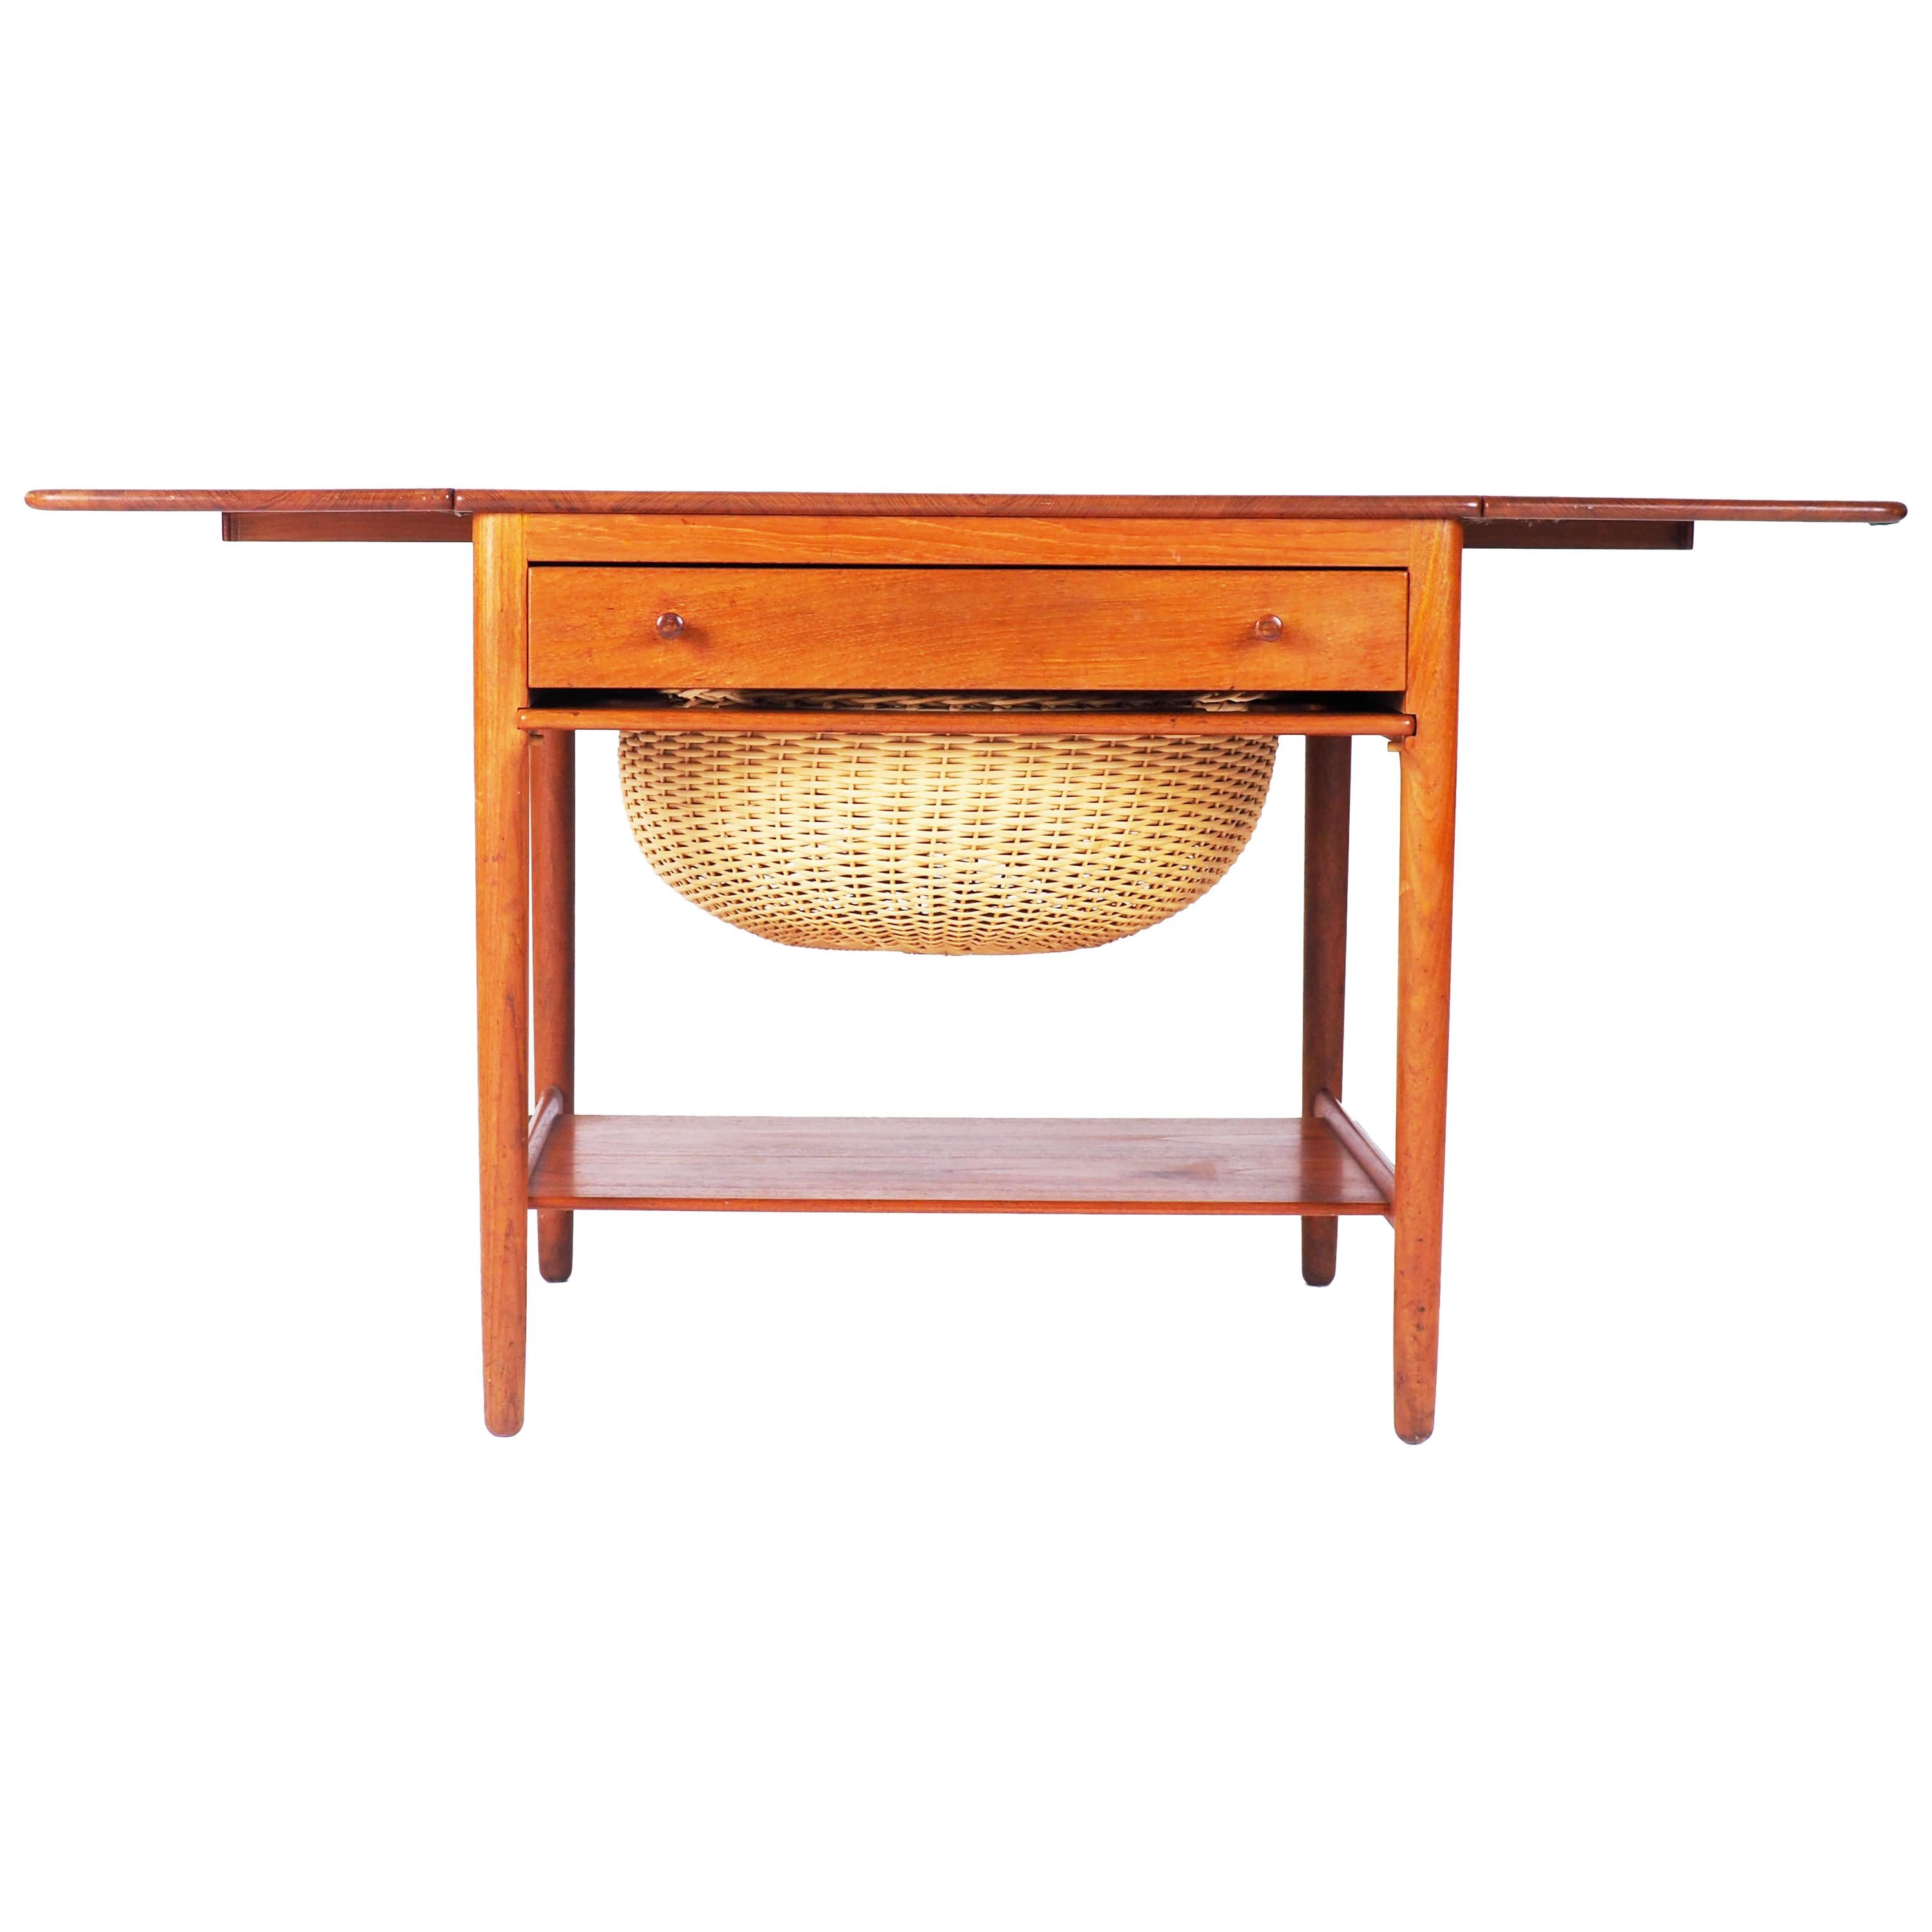 Sewing table AT-33 by Hans J Wegner made by Andreas Tuck, Denmark